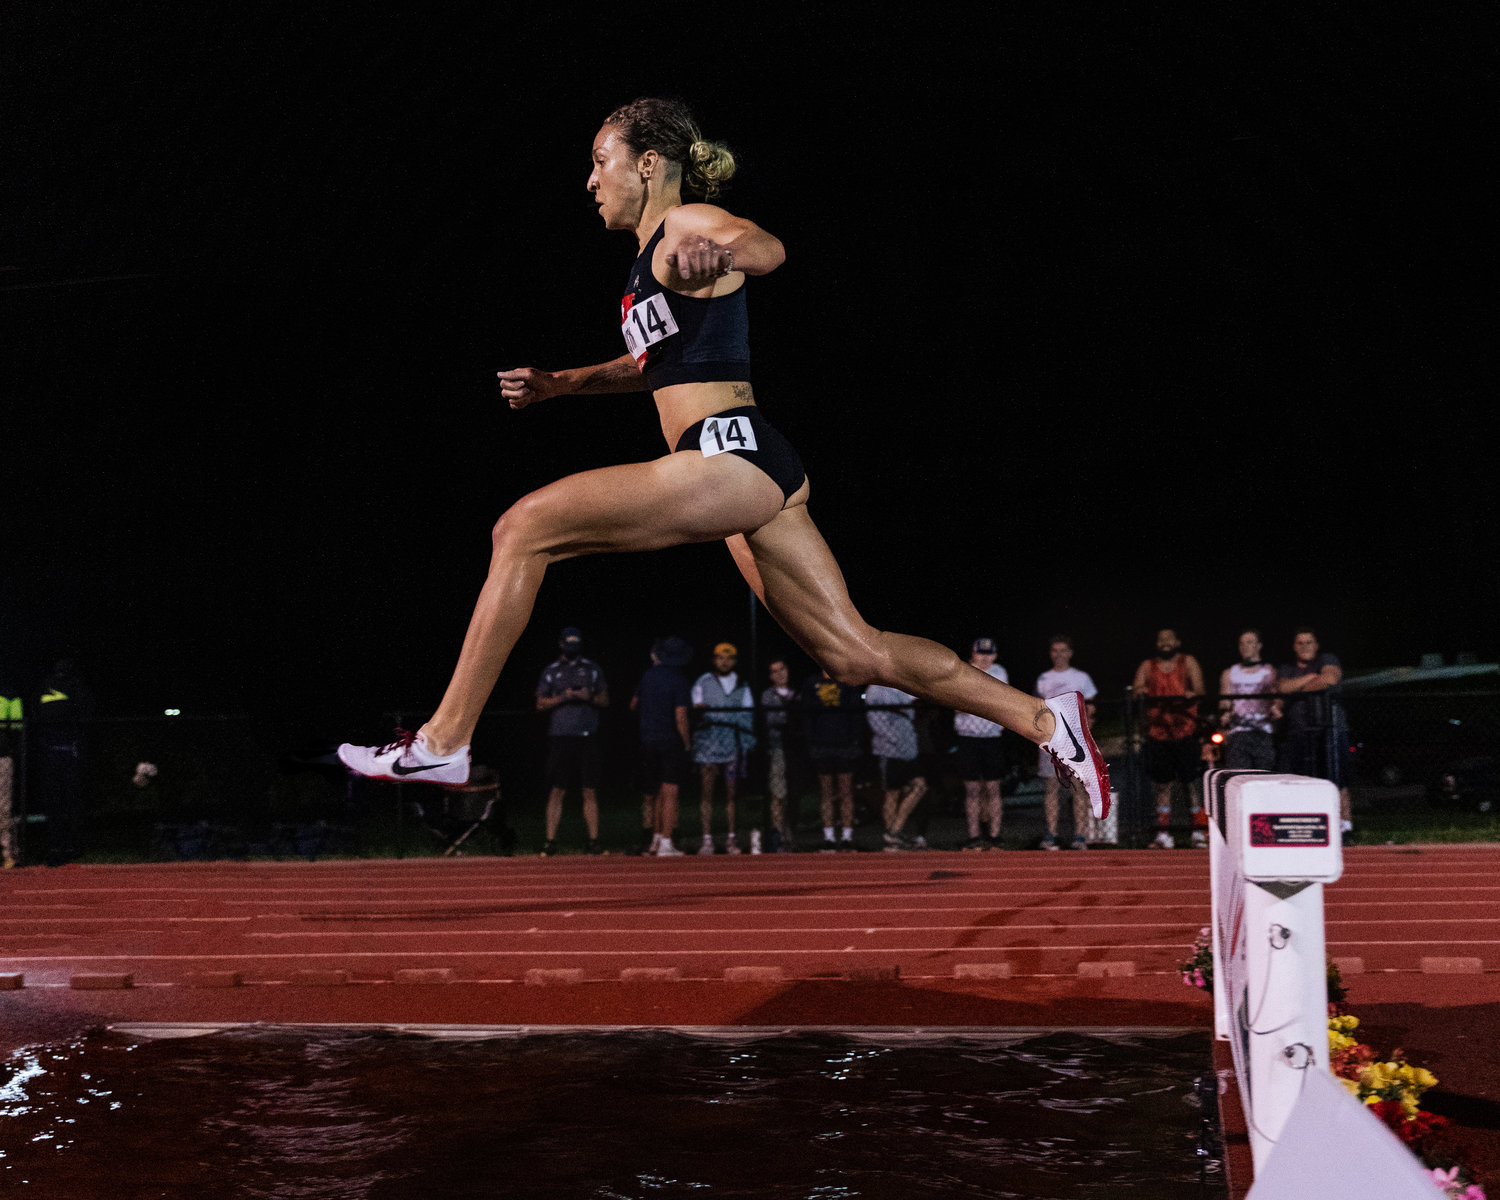 Caroline Austin, a 2009 W.F. West graduate, competed in the women's steeplechase at the U.S. Track and Field Olympic trials on June 20.